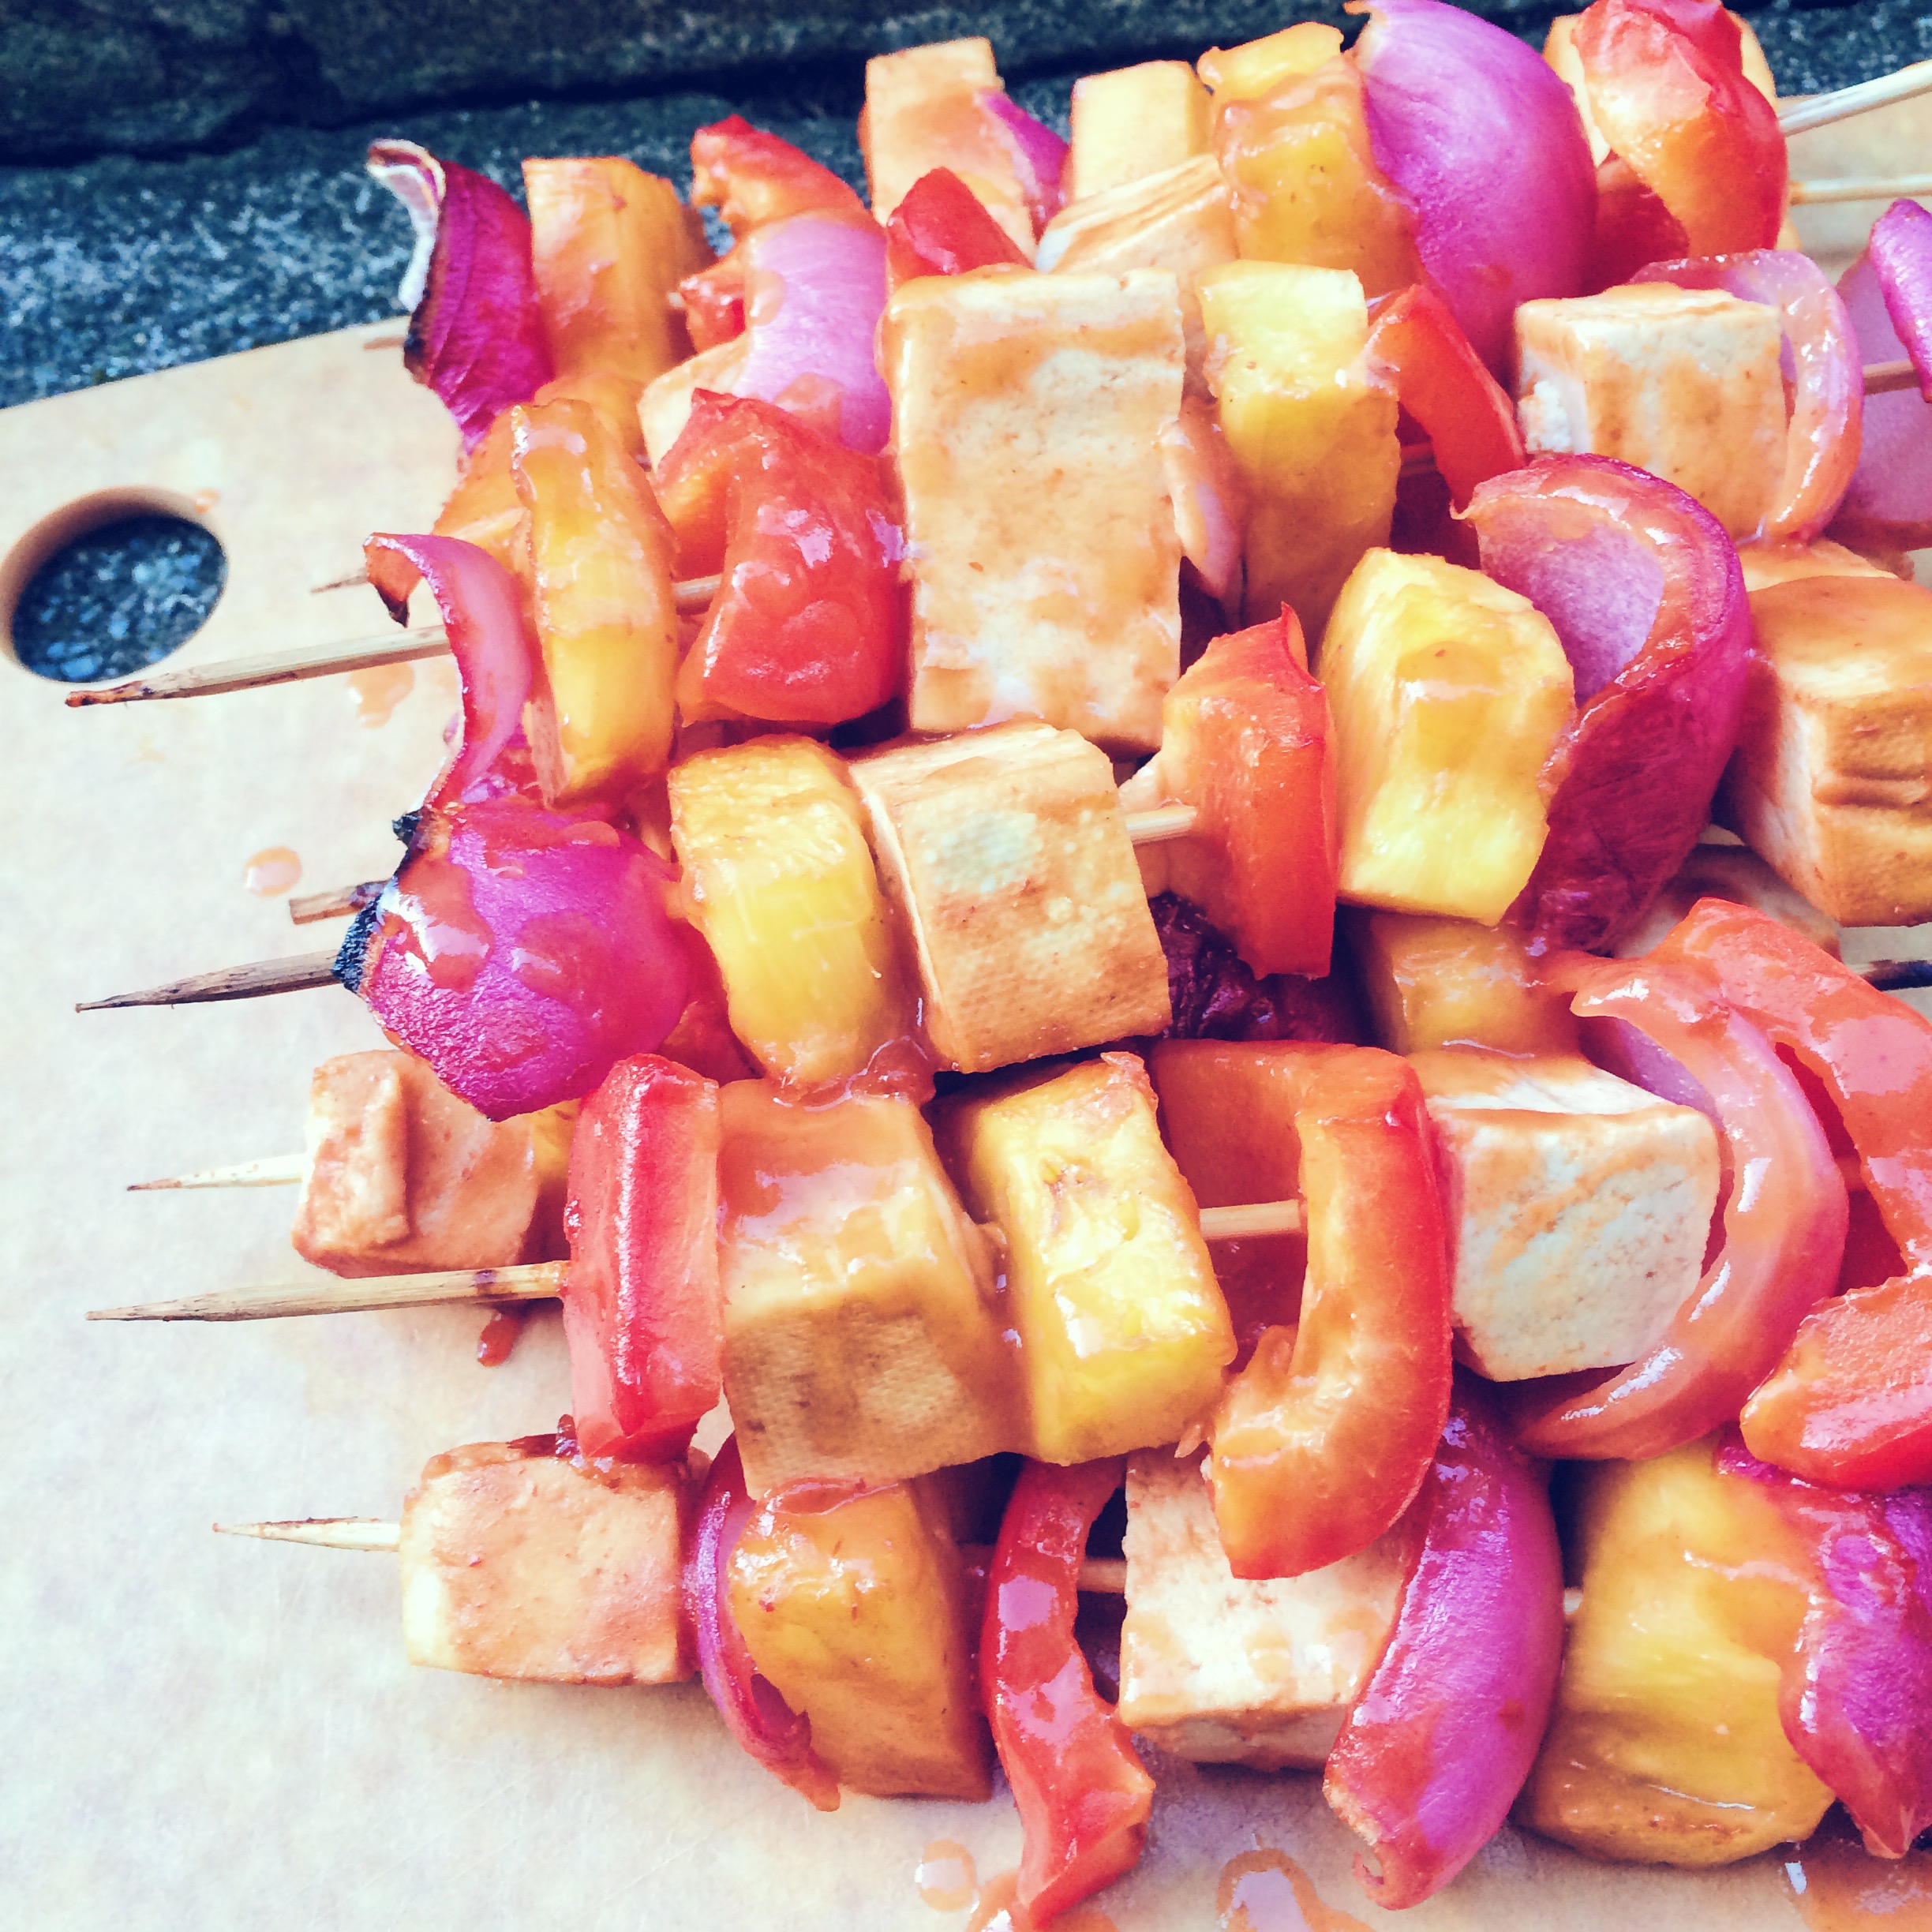 Review of the Thug Kitchen Pineapple Kabobs